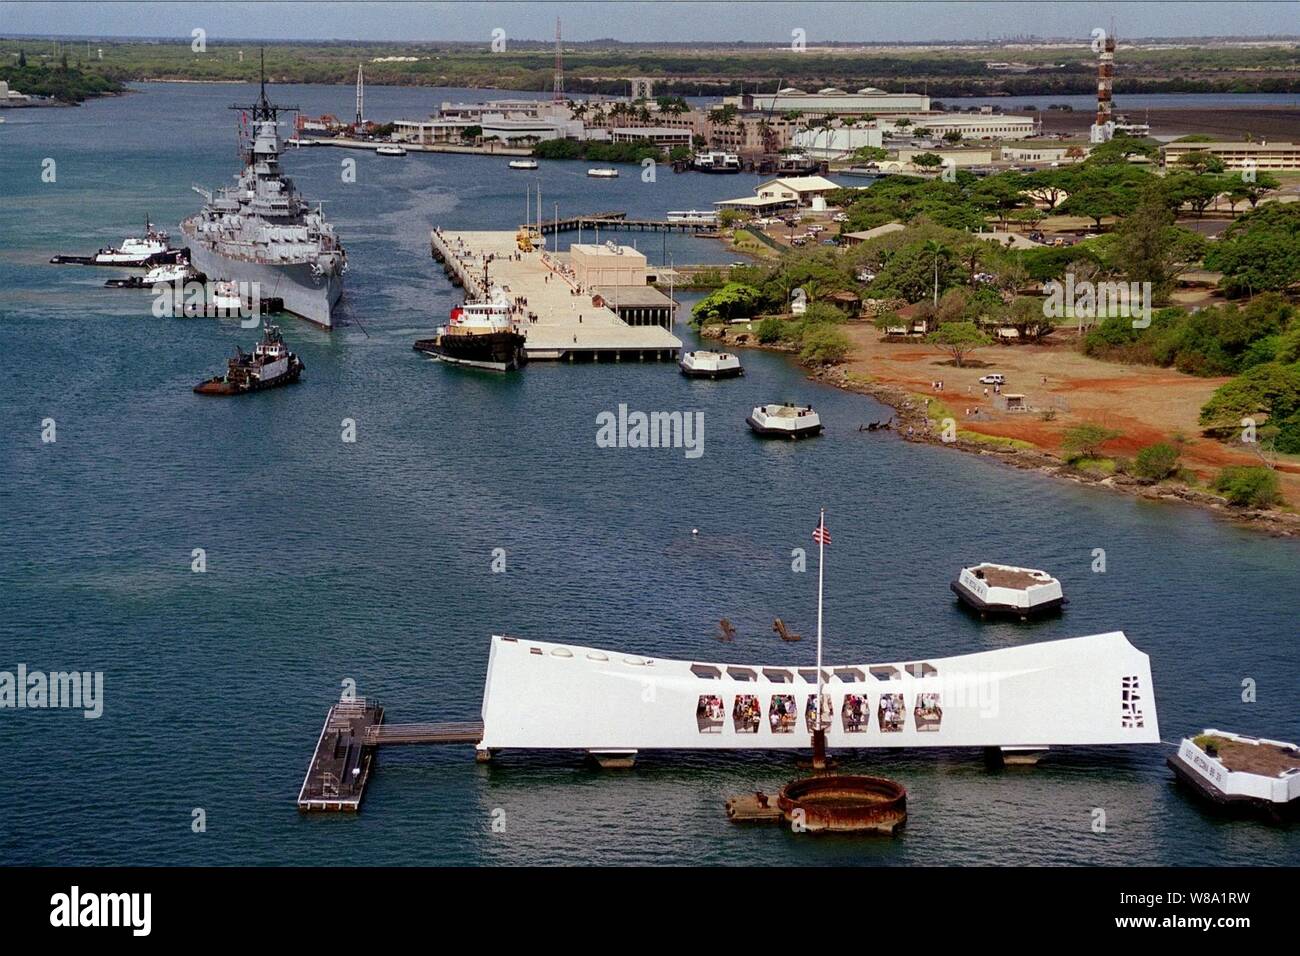 Tug boats push the battleship USS Missouri (BB 63) to its new berth at Ford Island, on June 22, 1998, as it joins the USS Arizona Memorial (foreground) in Pearl Harbor, Hawaii.  Secretary of the Navy John H. Dalton signed the Donation Agreement on May 4th, allowing Missouri to be used as a museum near the Arizona Memorial as symbols of the beginning and the end of World War II.  The Missouri was towed 2,600-miles across the Pacific Ocean from Bremerton, Wash. Stock Photo